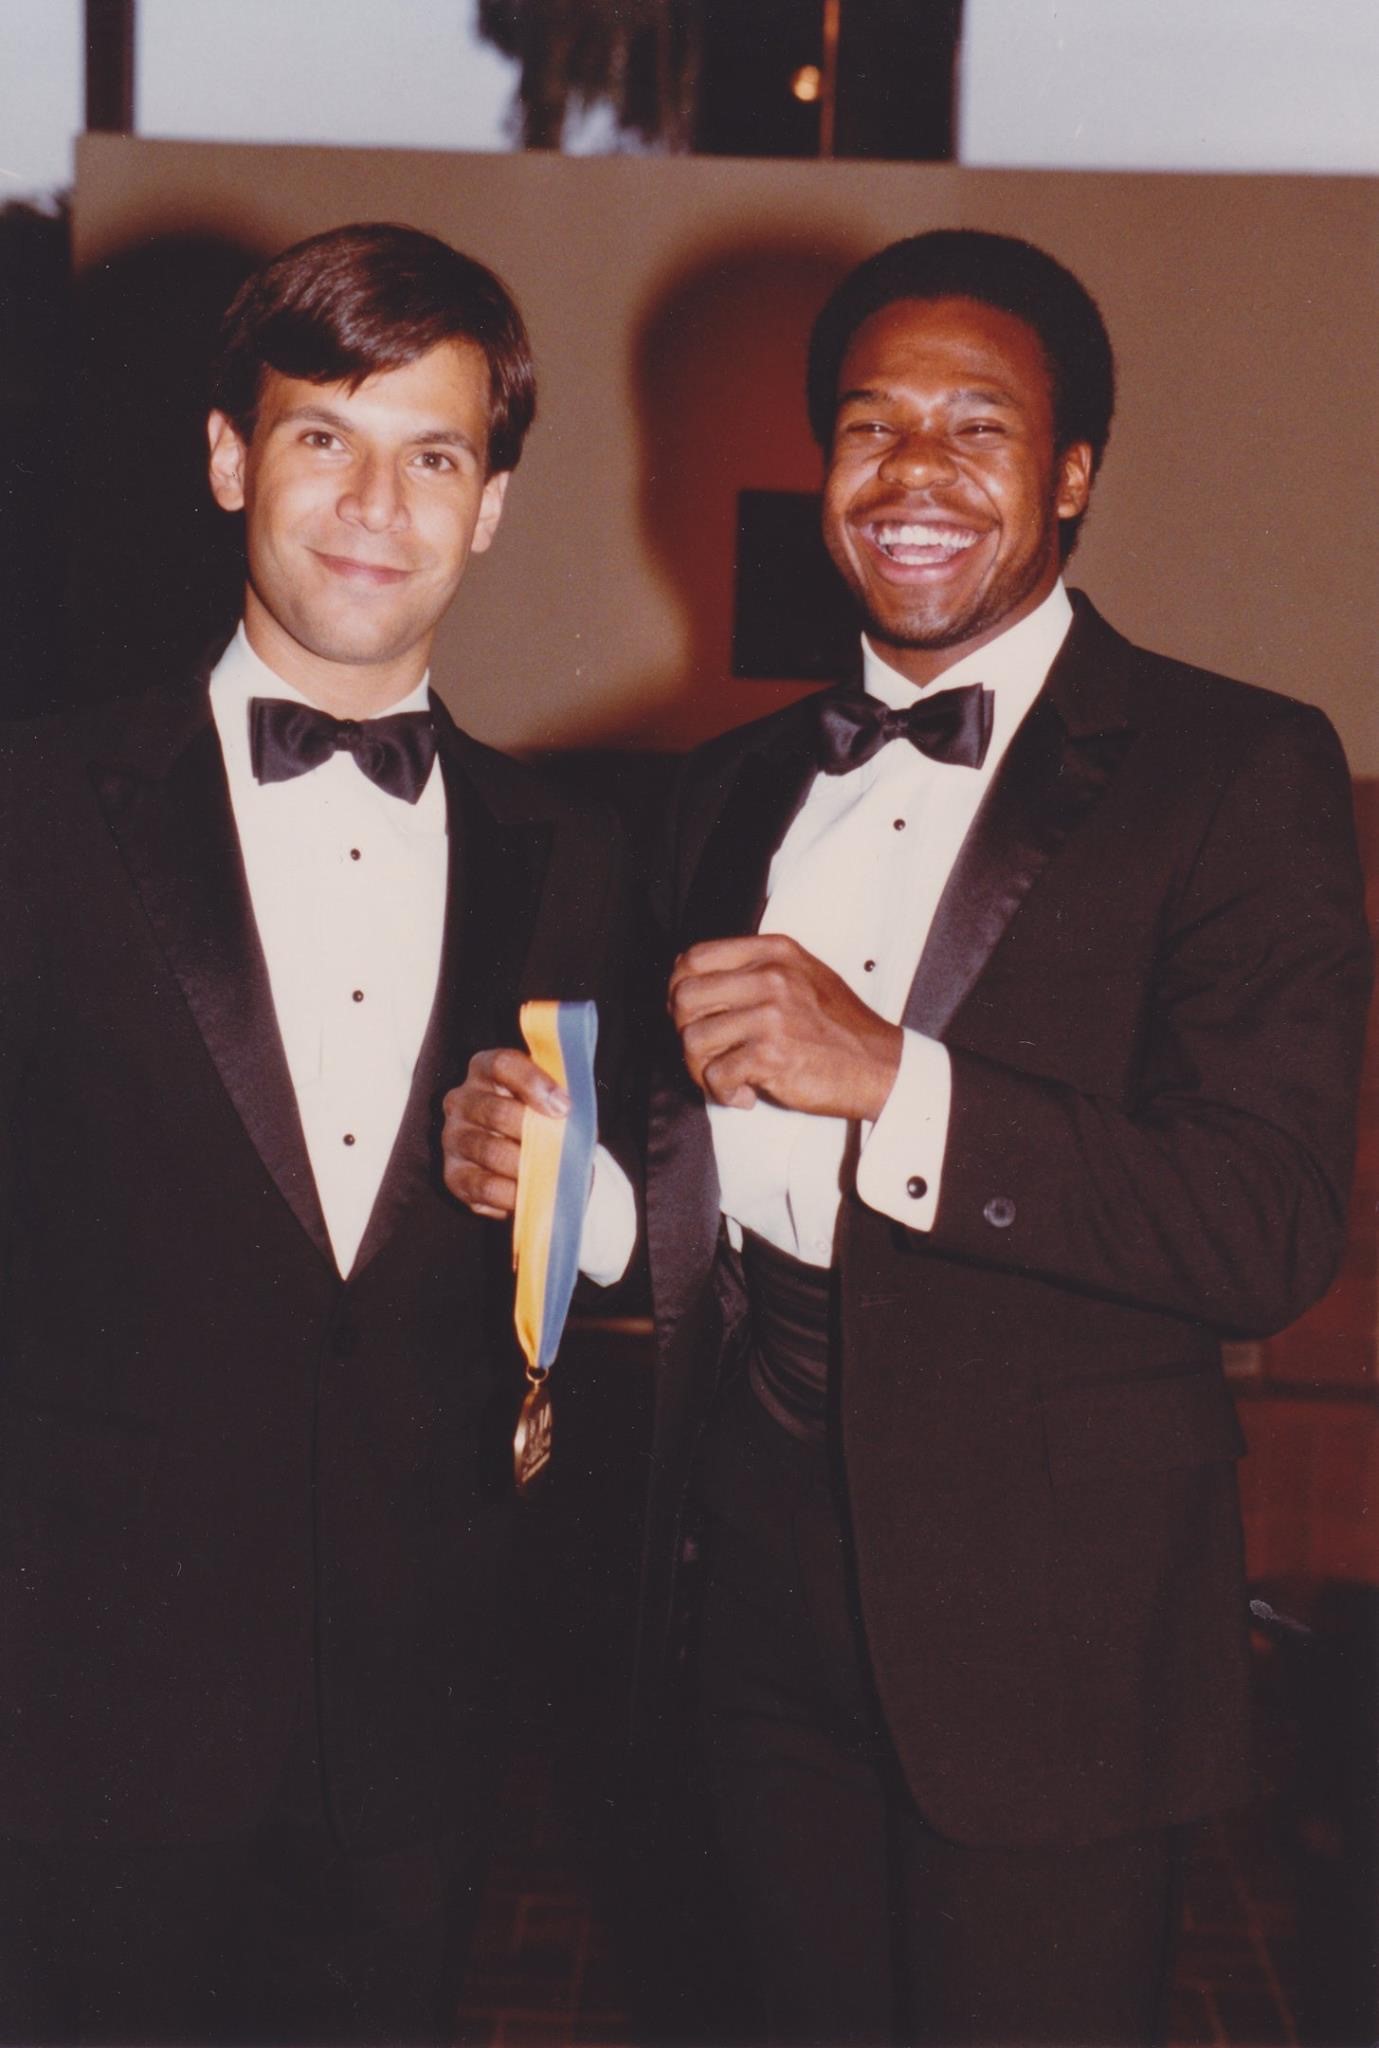 A photograph of Robert "Bobby" Grace in a tuxedo holding a gold medal with a blue and yellow ribbon standing next to another man, also wearing a tuxedo.